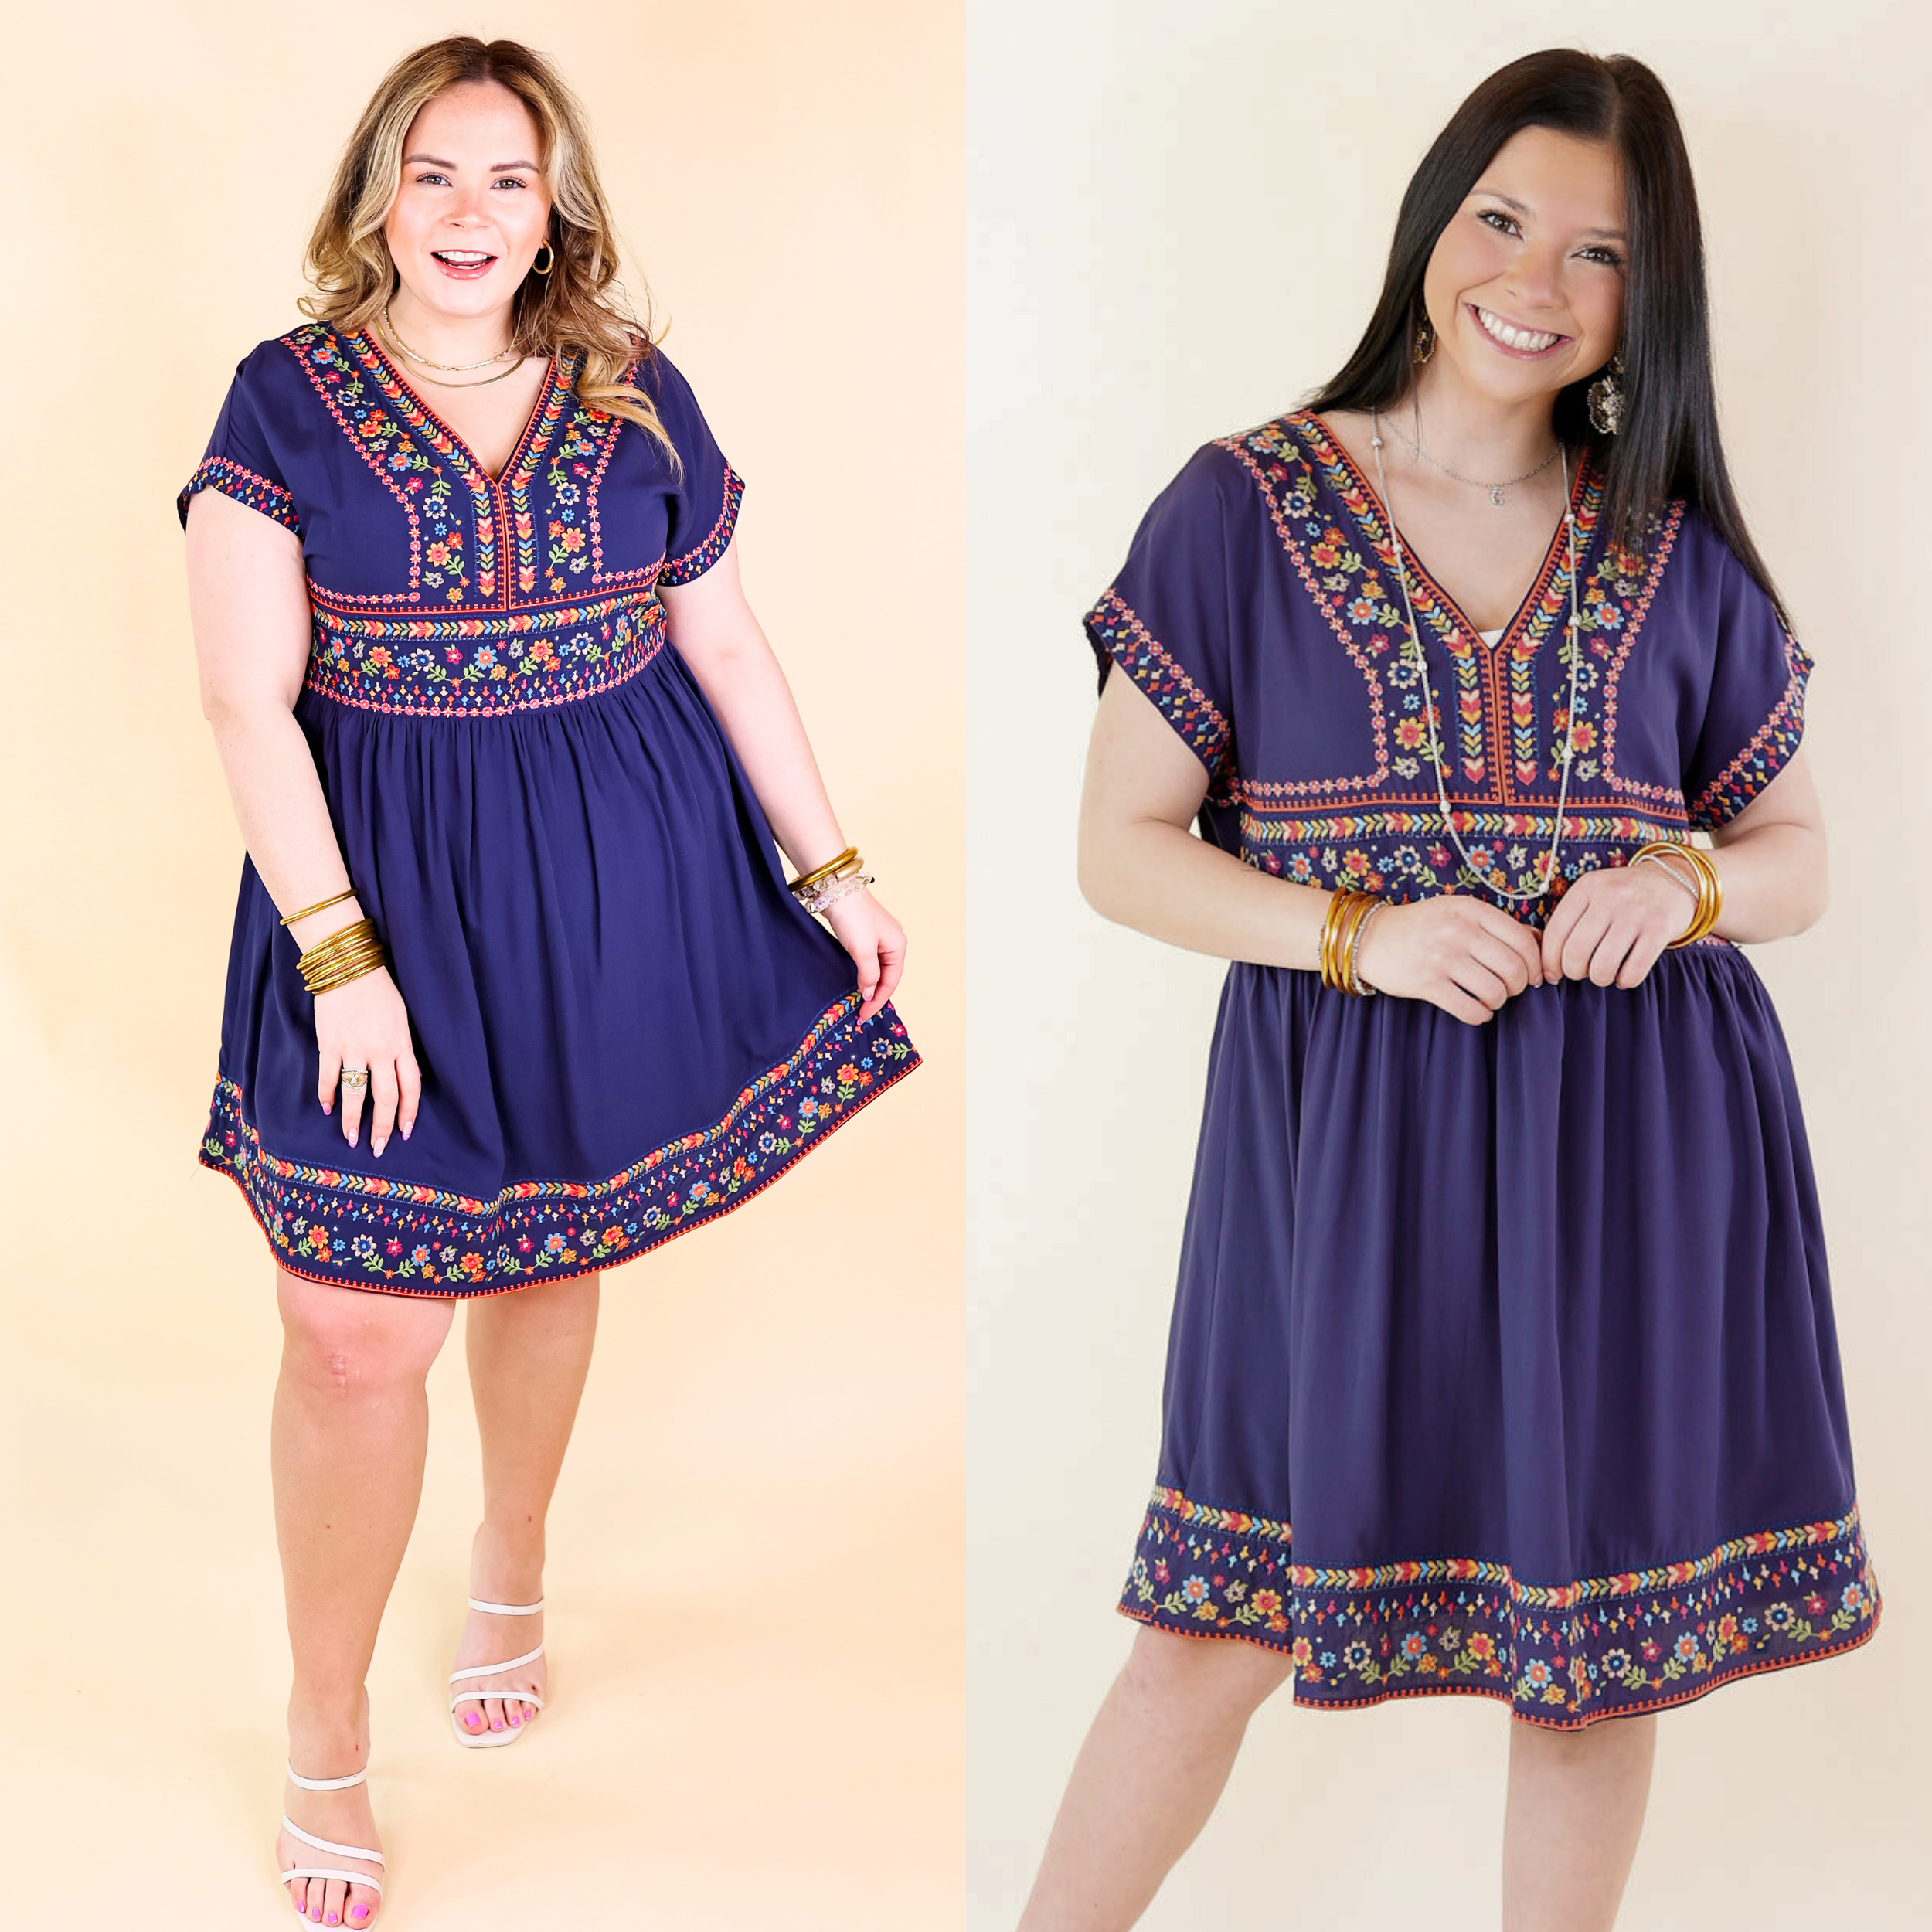 Passing Through V Neck Embroidered Dress with Short Sleeves in Navy Blue - Giddy Up Glamour Boutique